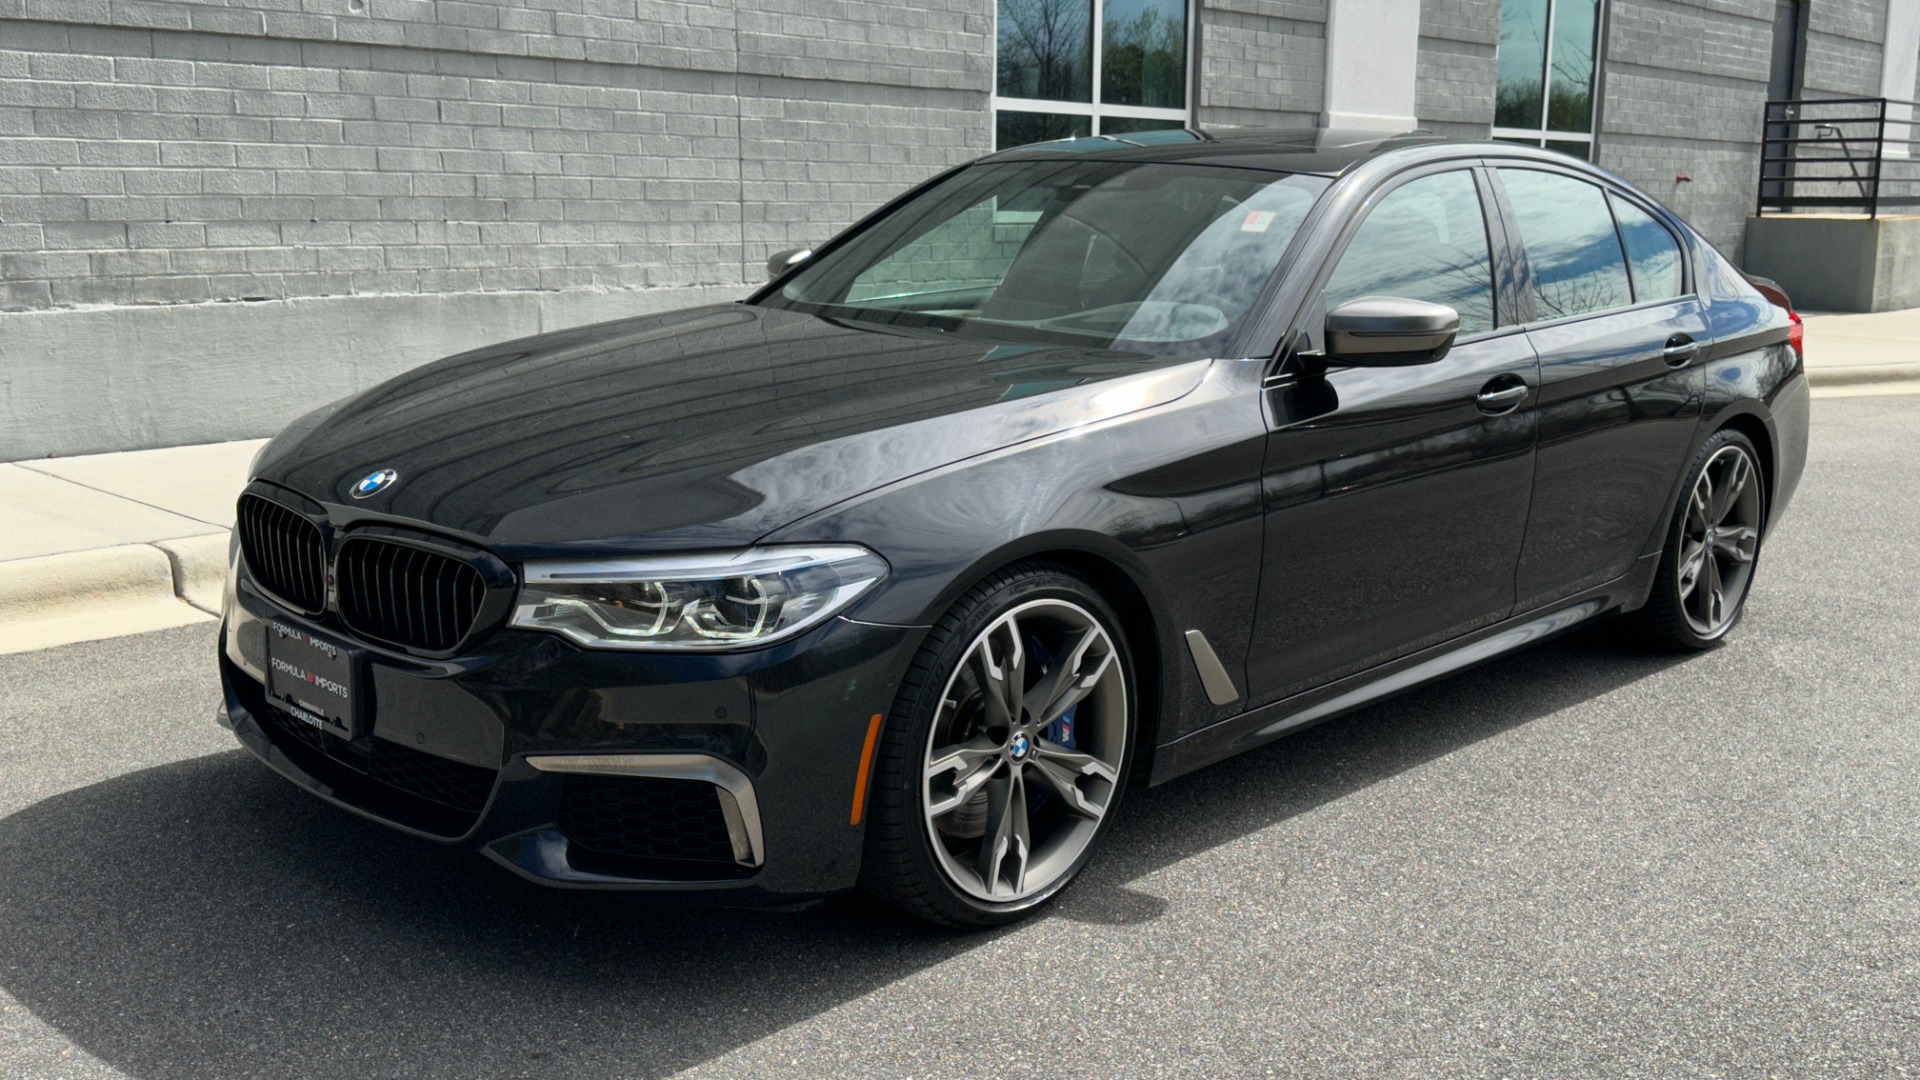 Used 2020 BMW 5 Series M550i xDrive / 20IN WHEELS/ DRIVE ASSIST PLUS / EXECUTIVE PACKAGE / HEATED  for sale Sold at Formula Imports in Charlotte NC 28227 2